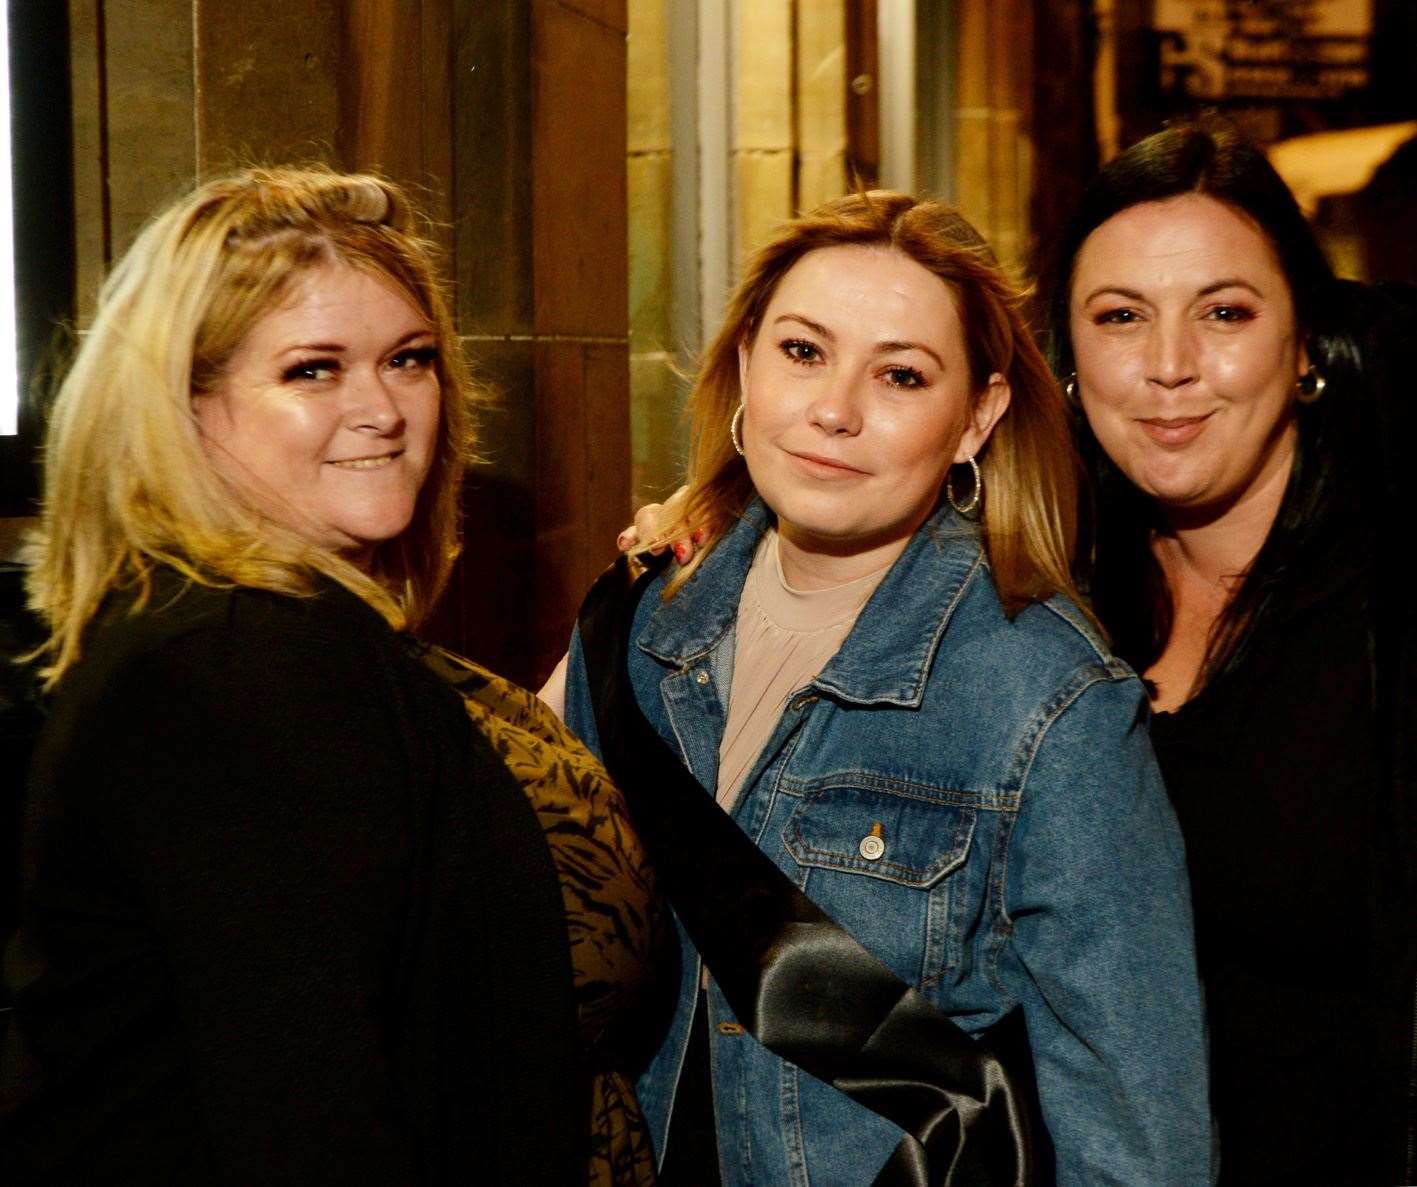 Cityseen 23 October 2021: Lynette Sangster, Aimee Harwood and Vicky Mackie celebrating Aimee's 29th birthday. Picture: James Mackenzie.